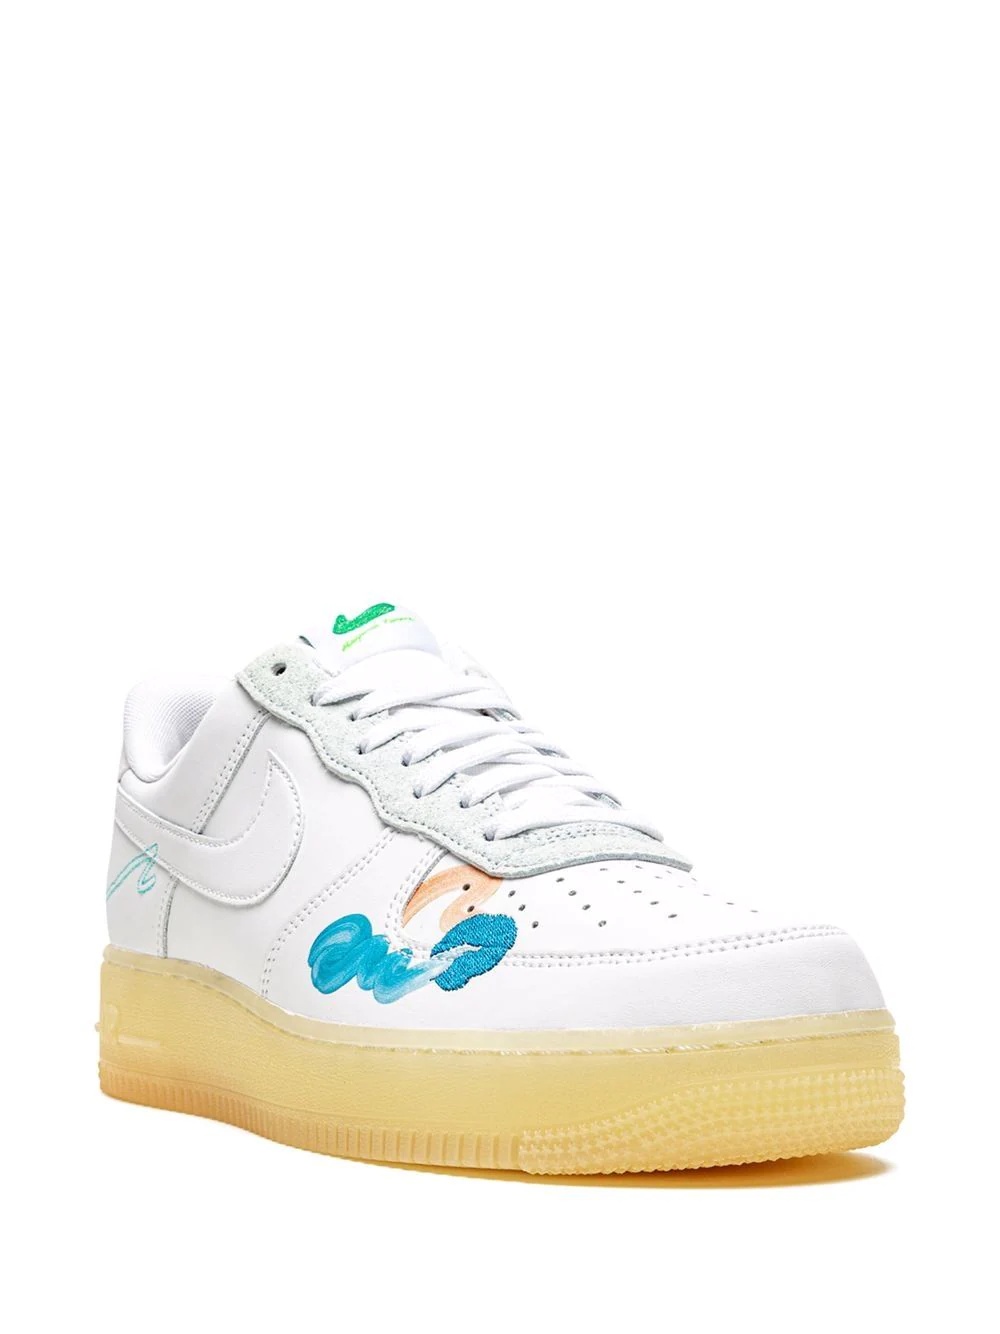 x Mayumi Yamase Air Force 1 Low Flyleather sneakers - 2